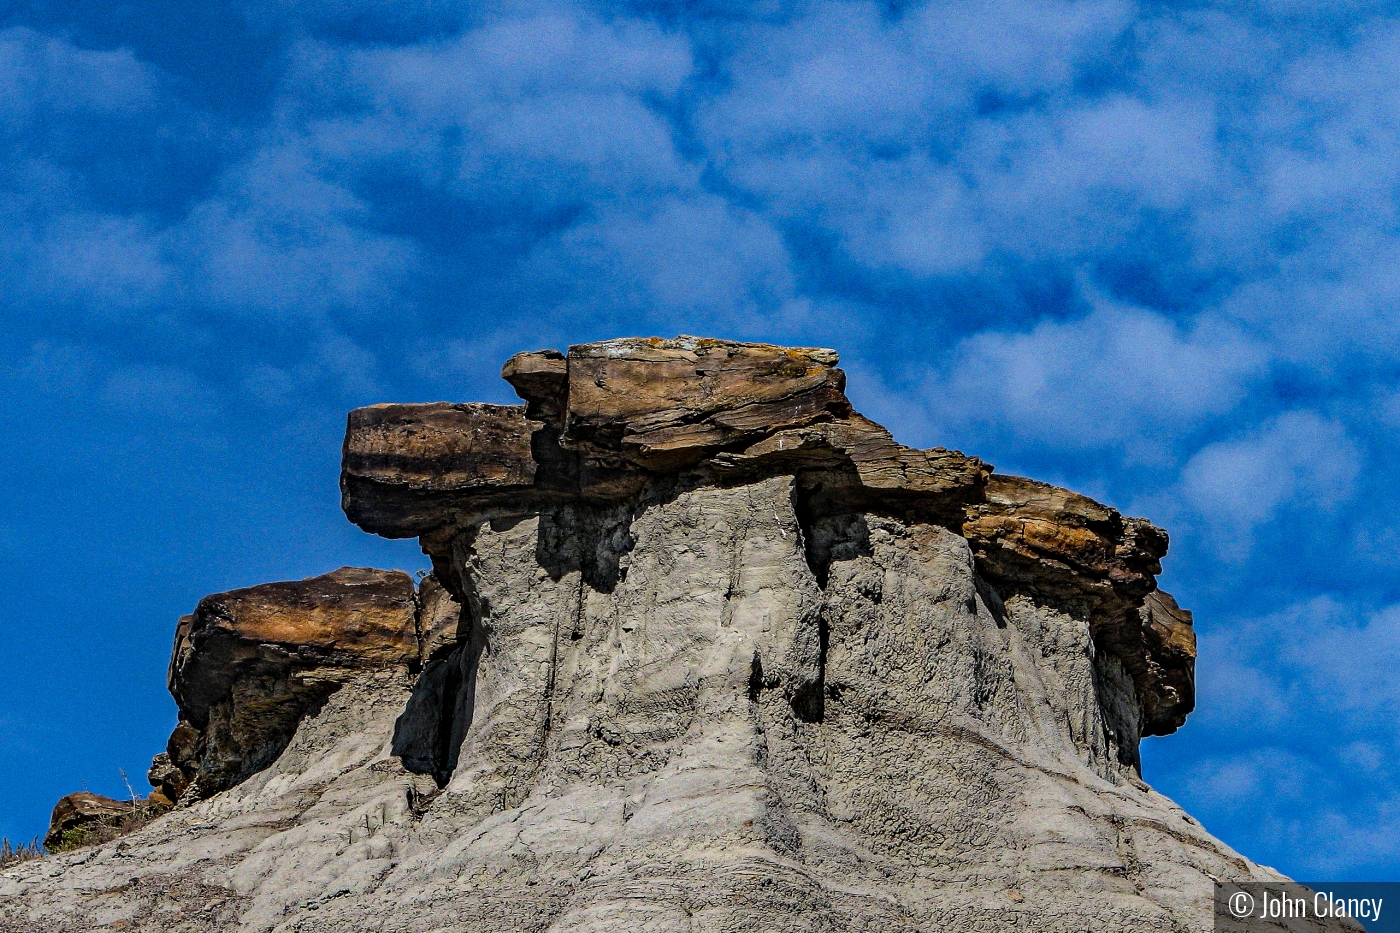 Sculpted rock and sandstone formation, Calgary, Alberta, Canada by John Clancy